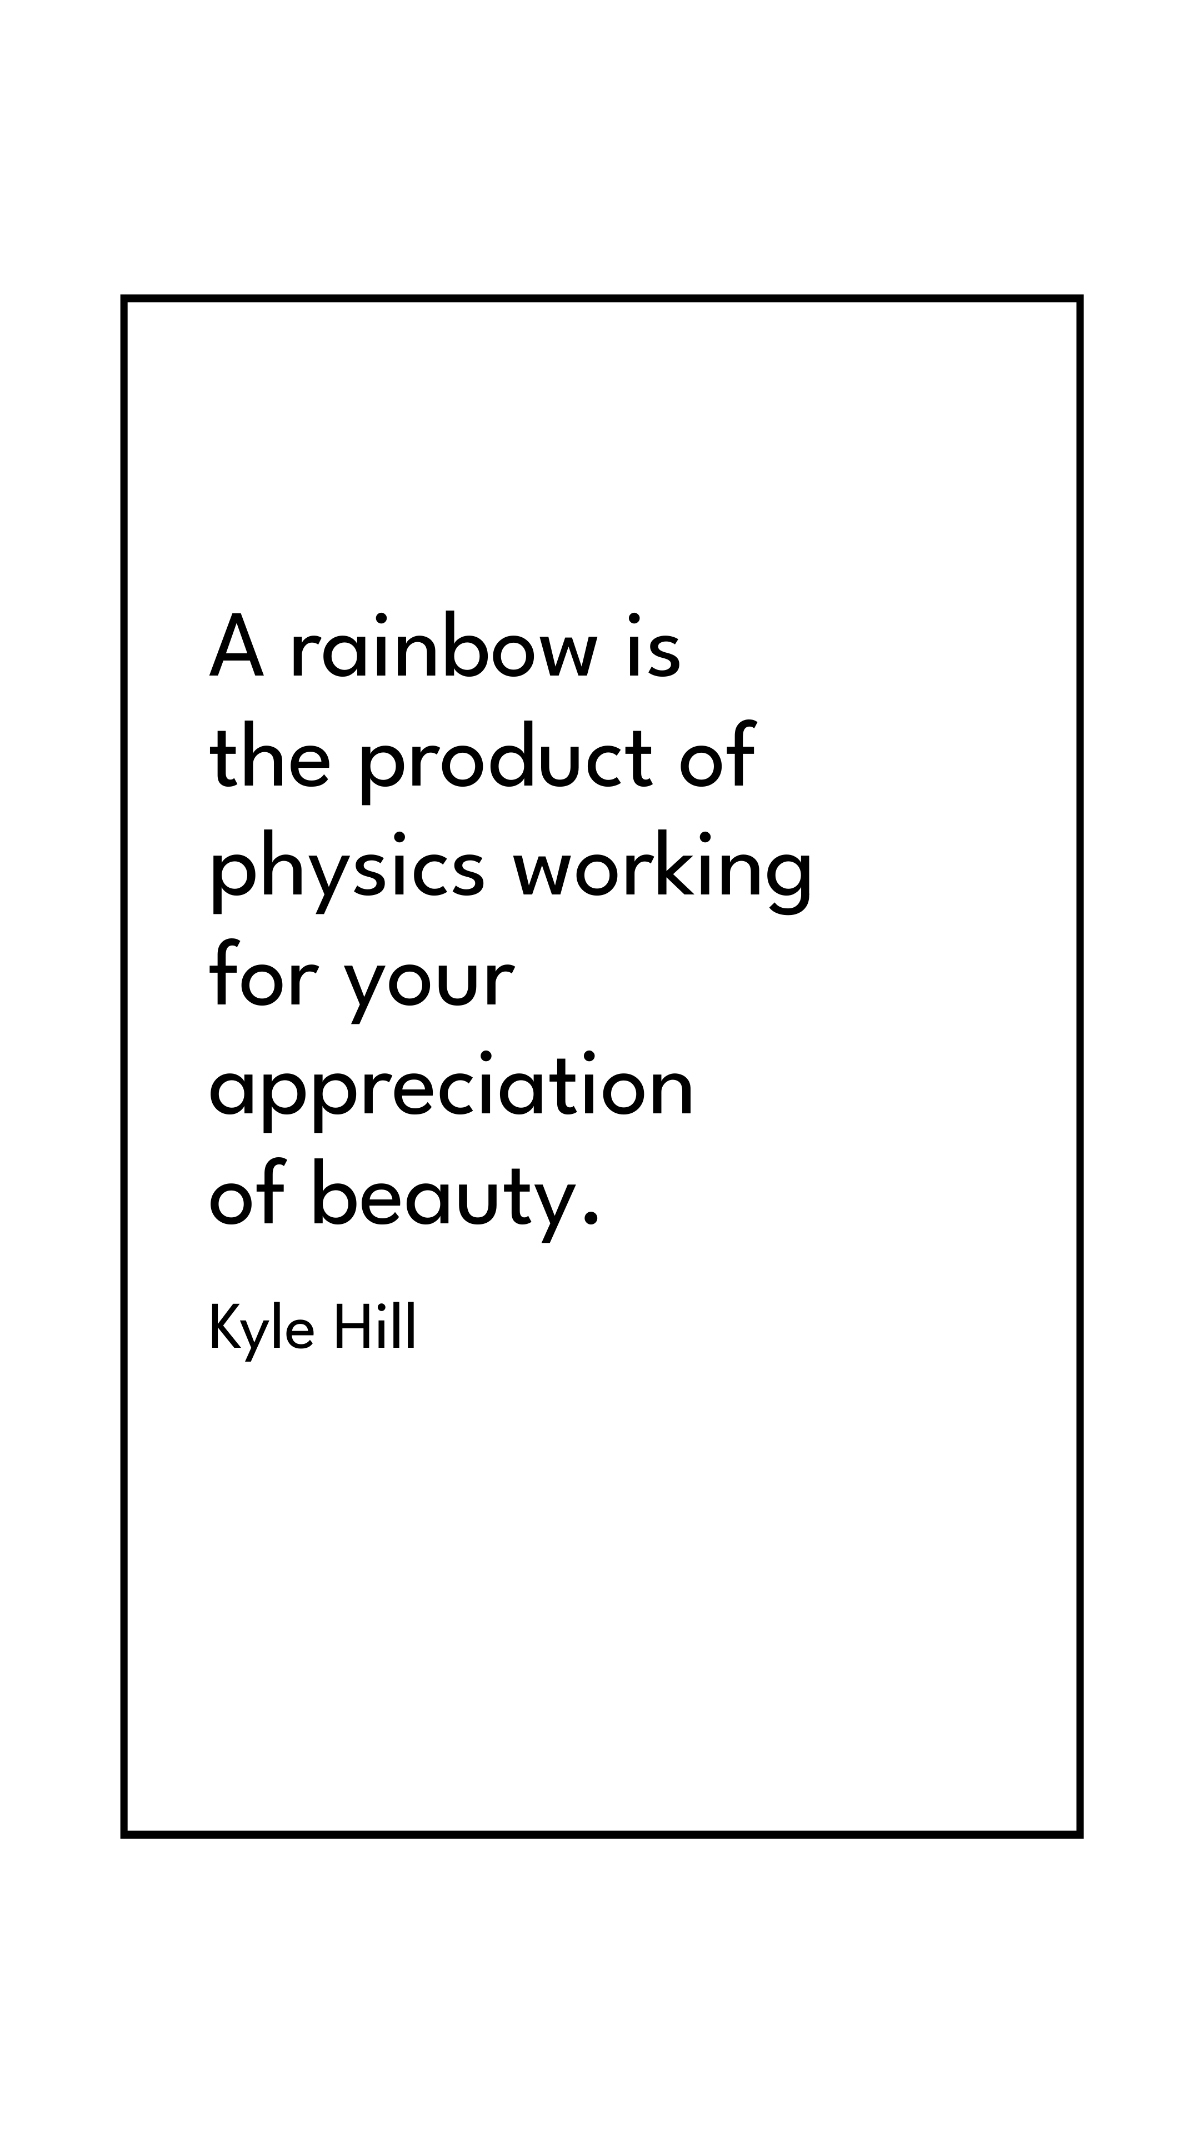 Kyle Hill - A rainbow is the product of physics working for your appreciation of beauty.